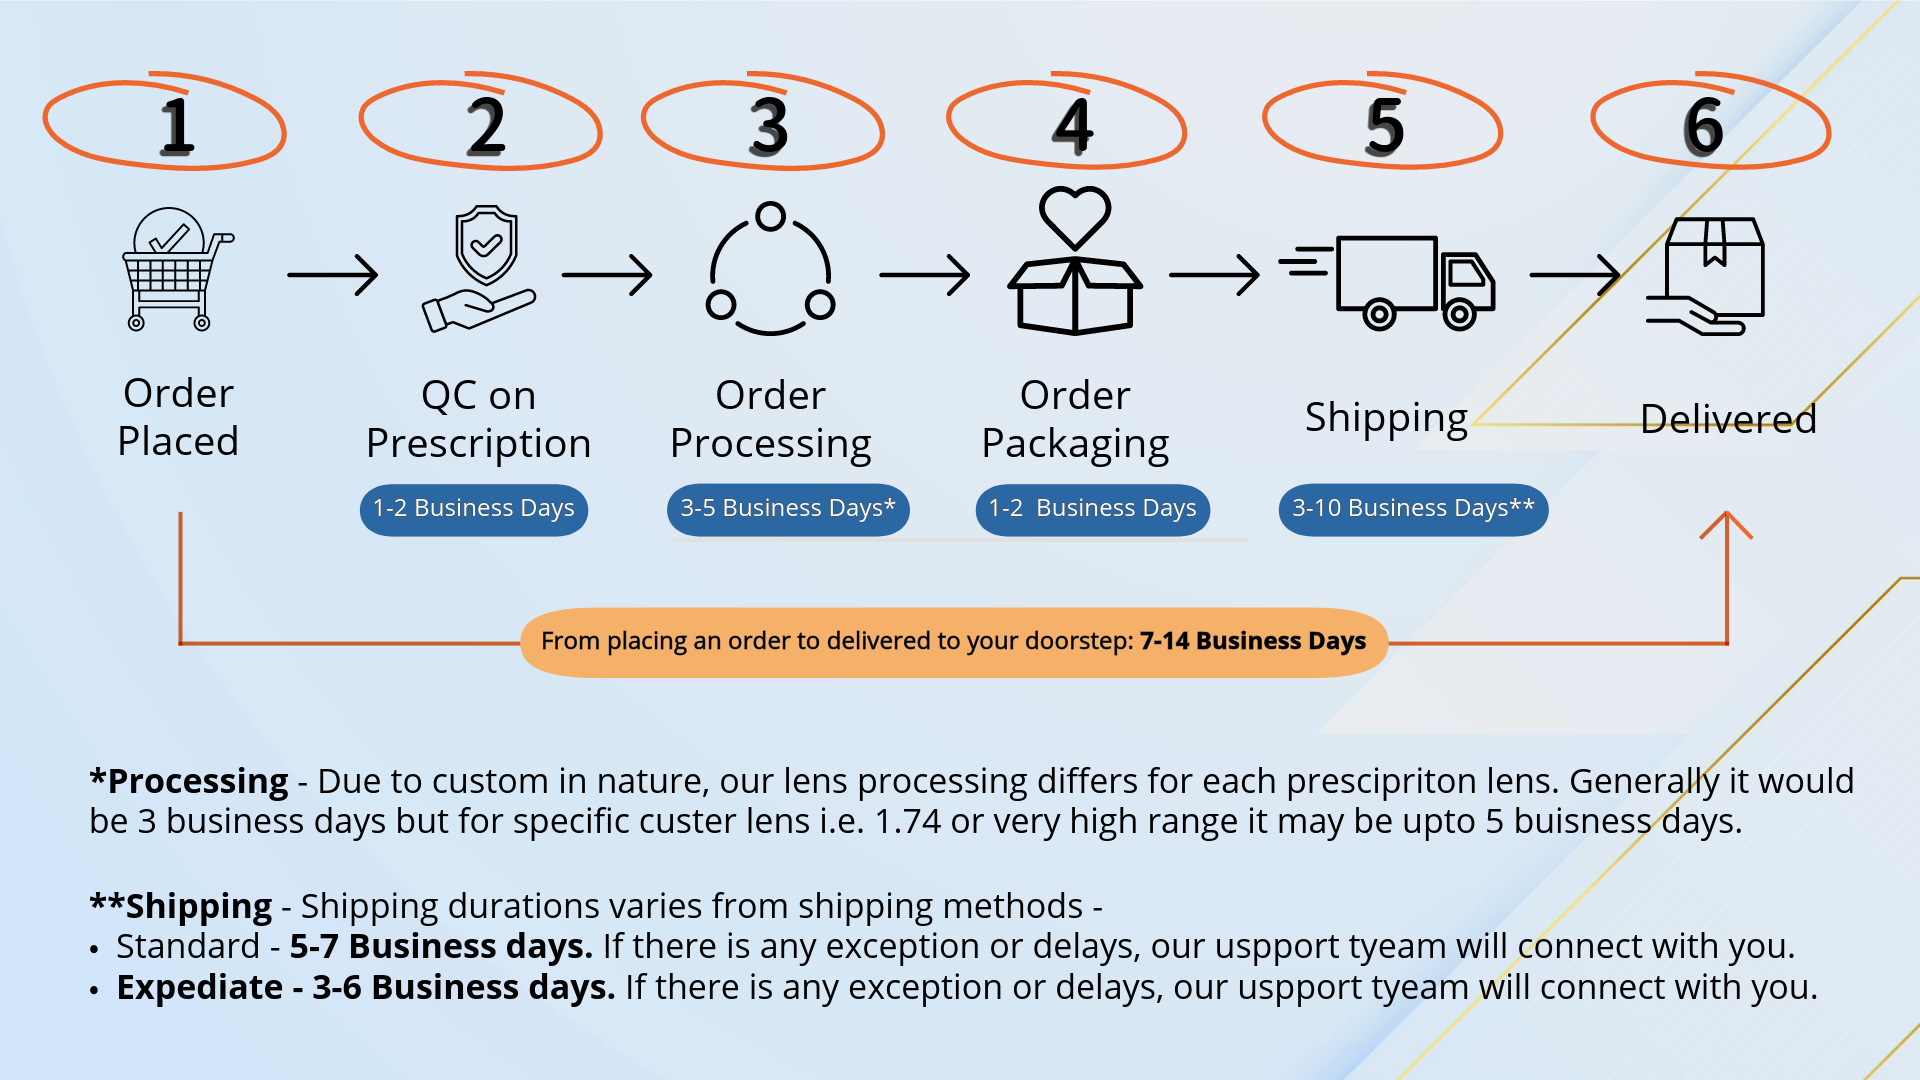 VivGlasses Shipping & Delivery Process